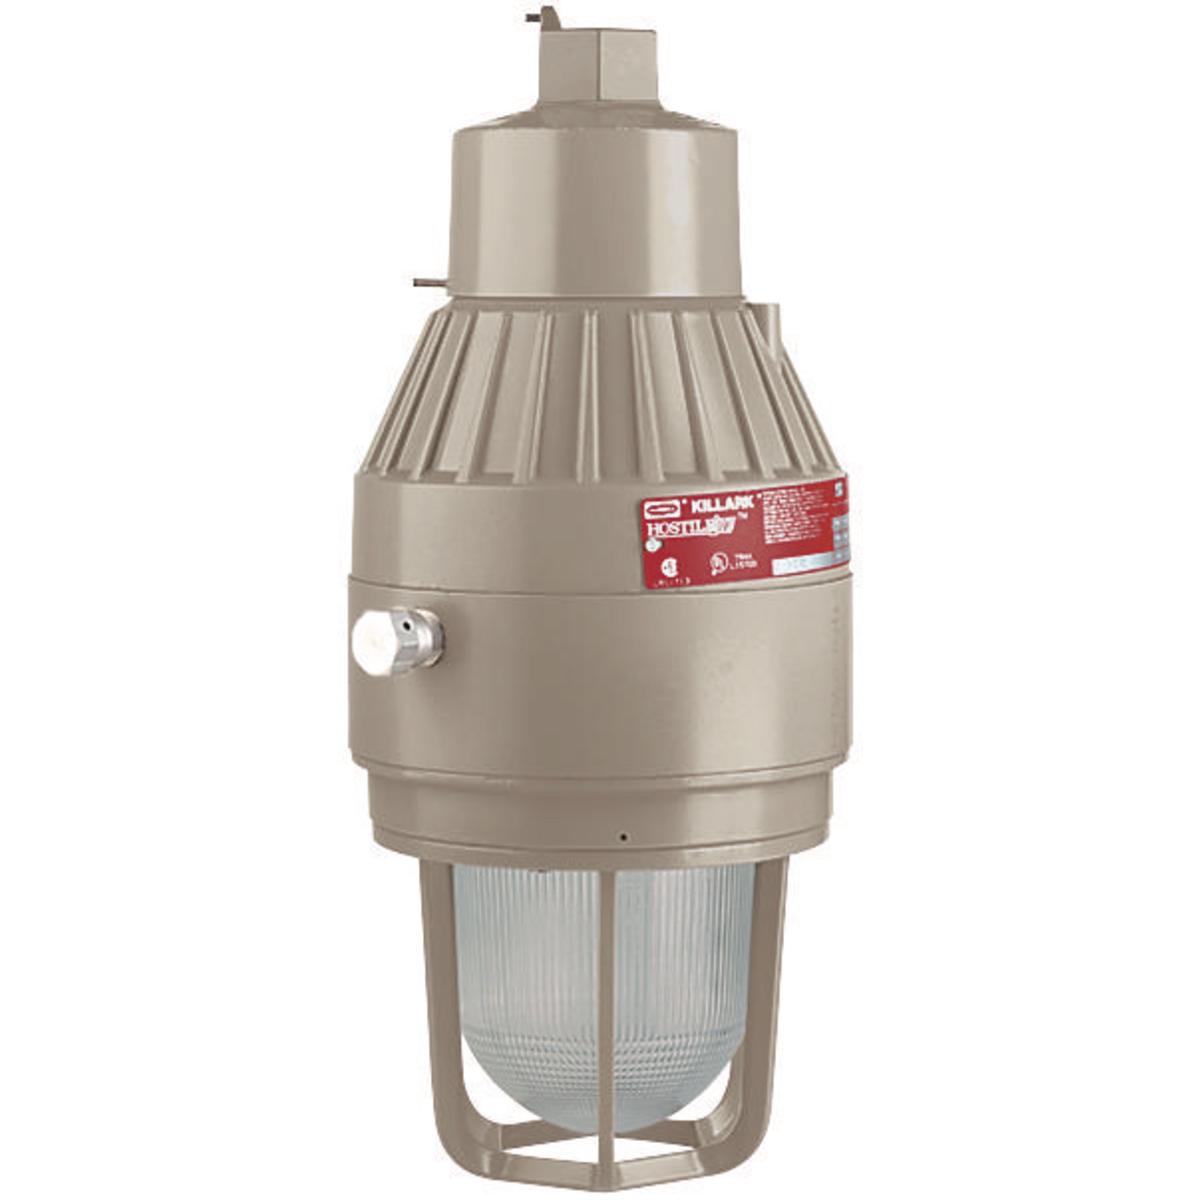 Hubbell EEQ0032E30A2G EEQ Emergency CFL 32E 120/277V Pendant with Guard  ; Quad-Pin long-life triple-tube compact ; Fluorescent lamps included ; Choice of Pendant, Ceiling, Wall or Stanchion mount ; Factory Sealed - No external seal required ; Corrosion resistant-Copper-free a